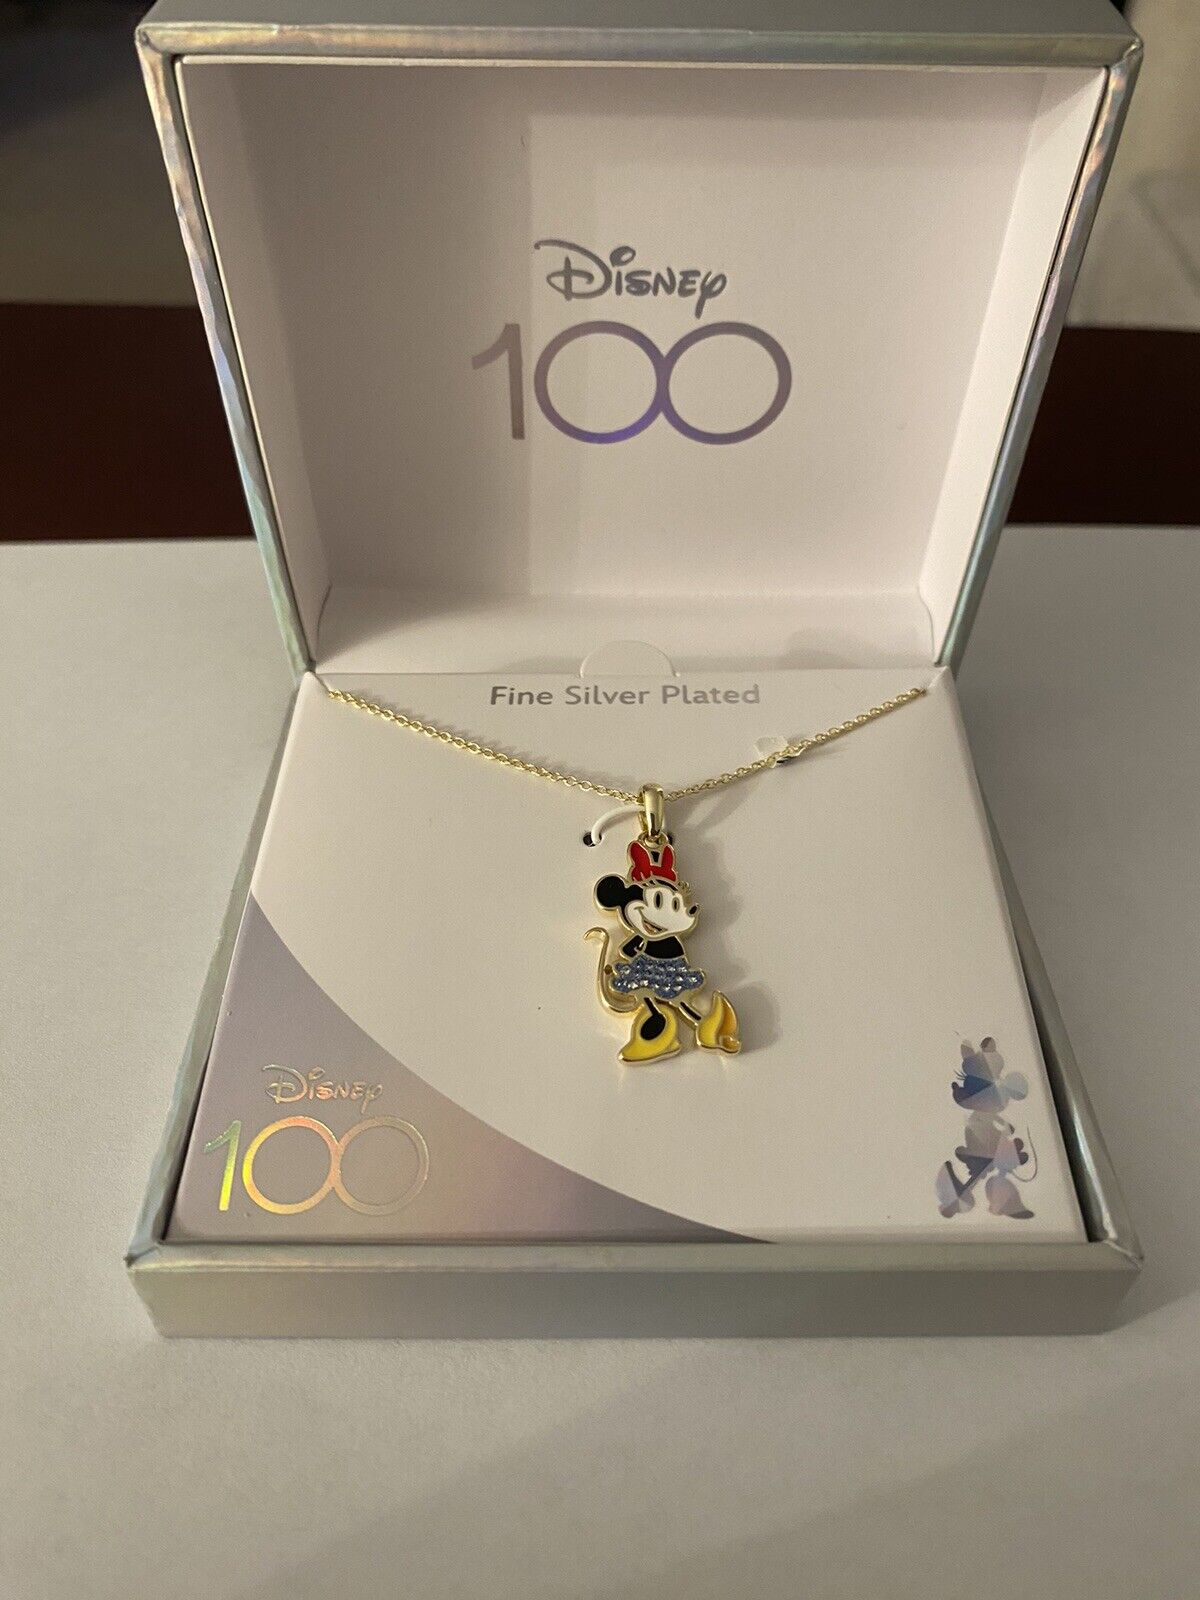 Disney Minnie Mouse Fine Silver Plated Necklace 100 Year Anniversary New in Box